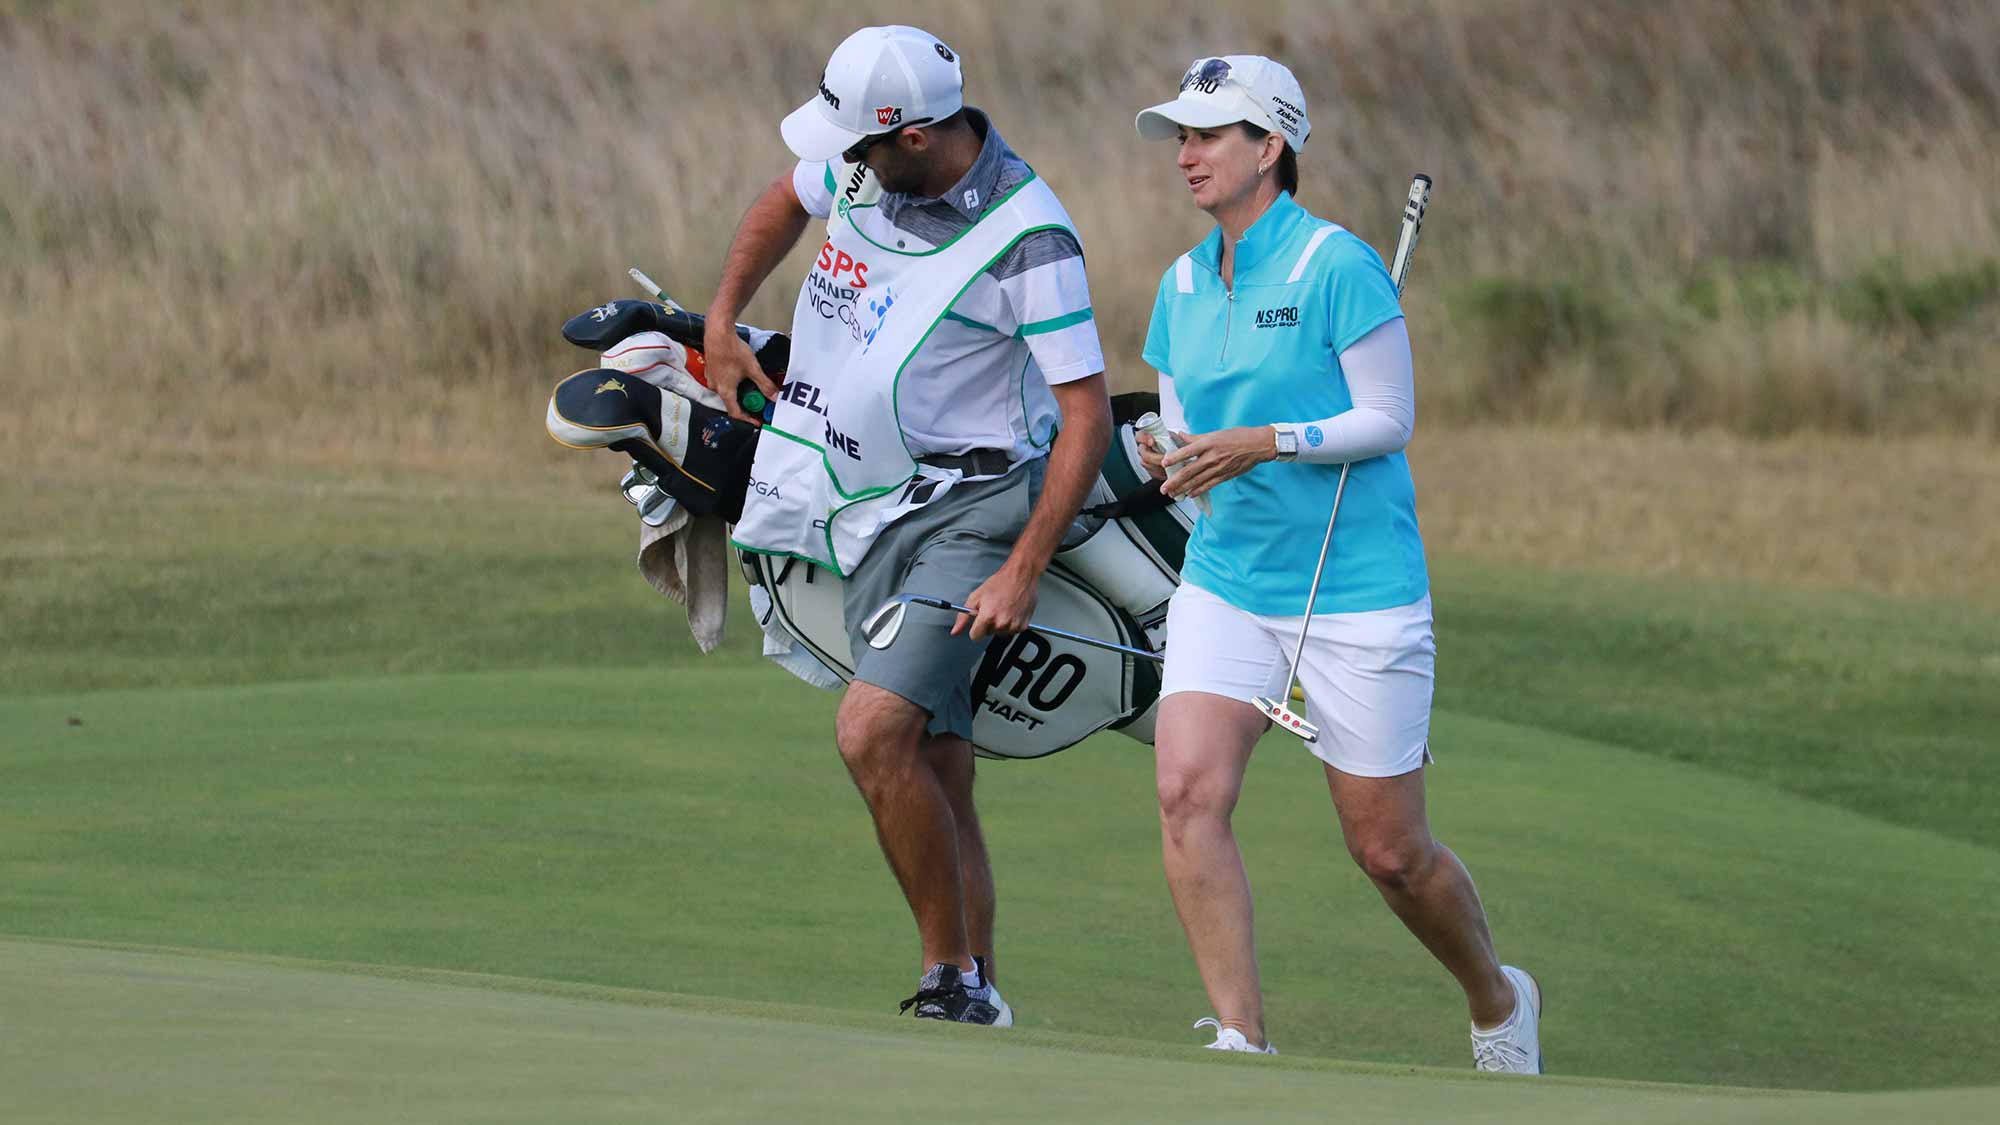 Karrie Webb walks with her caddie during the second round of the ISPS Handa Vic Open in Geelong, Australia on February 8, 2019